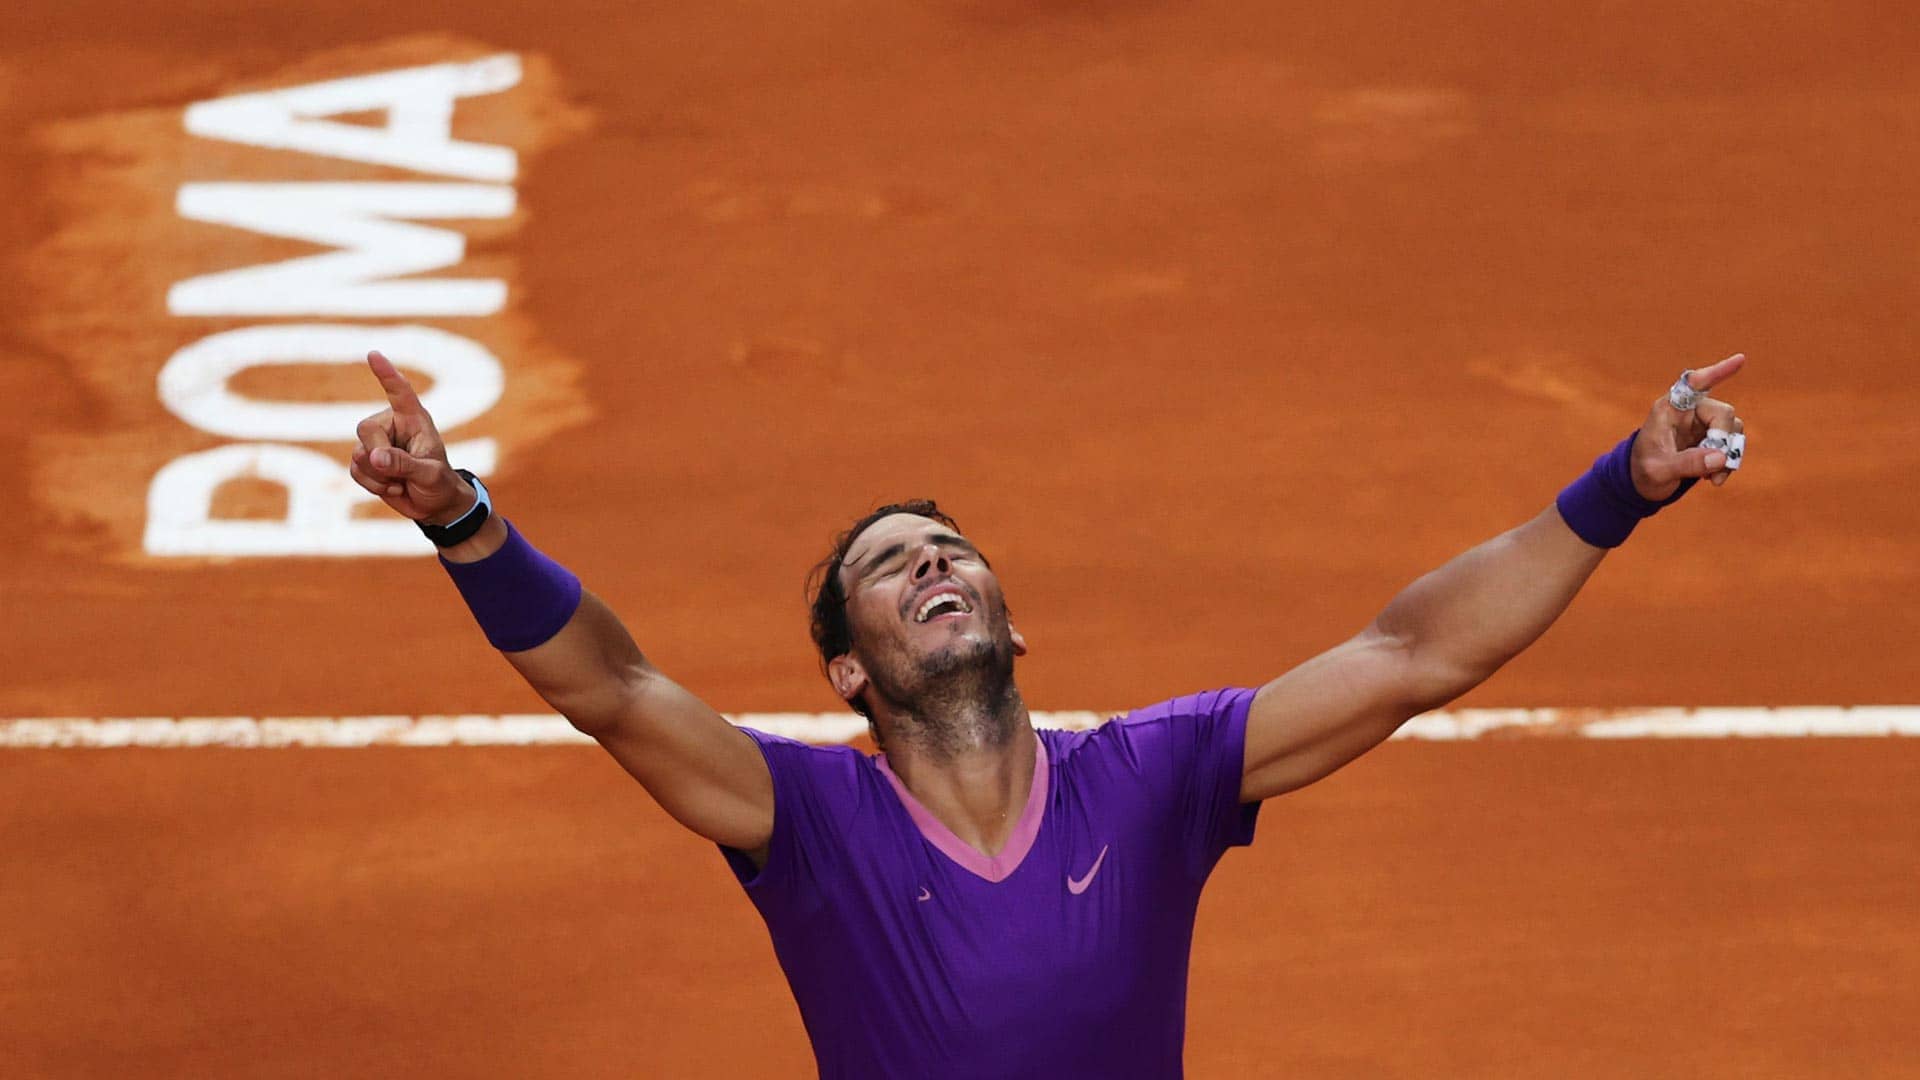 In Nadal's past finals, all roads led to Djokovic & Federer in Rome